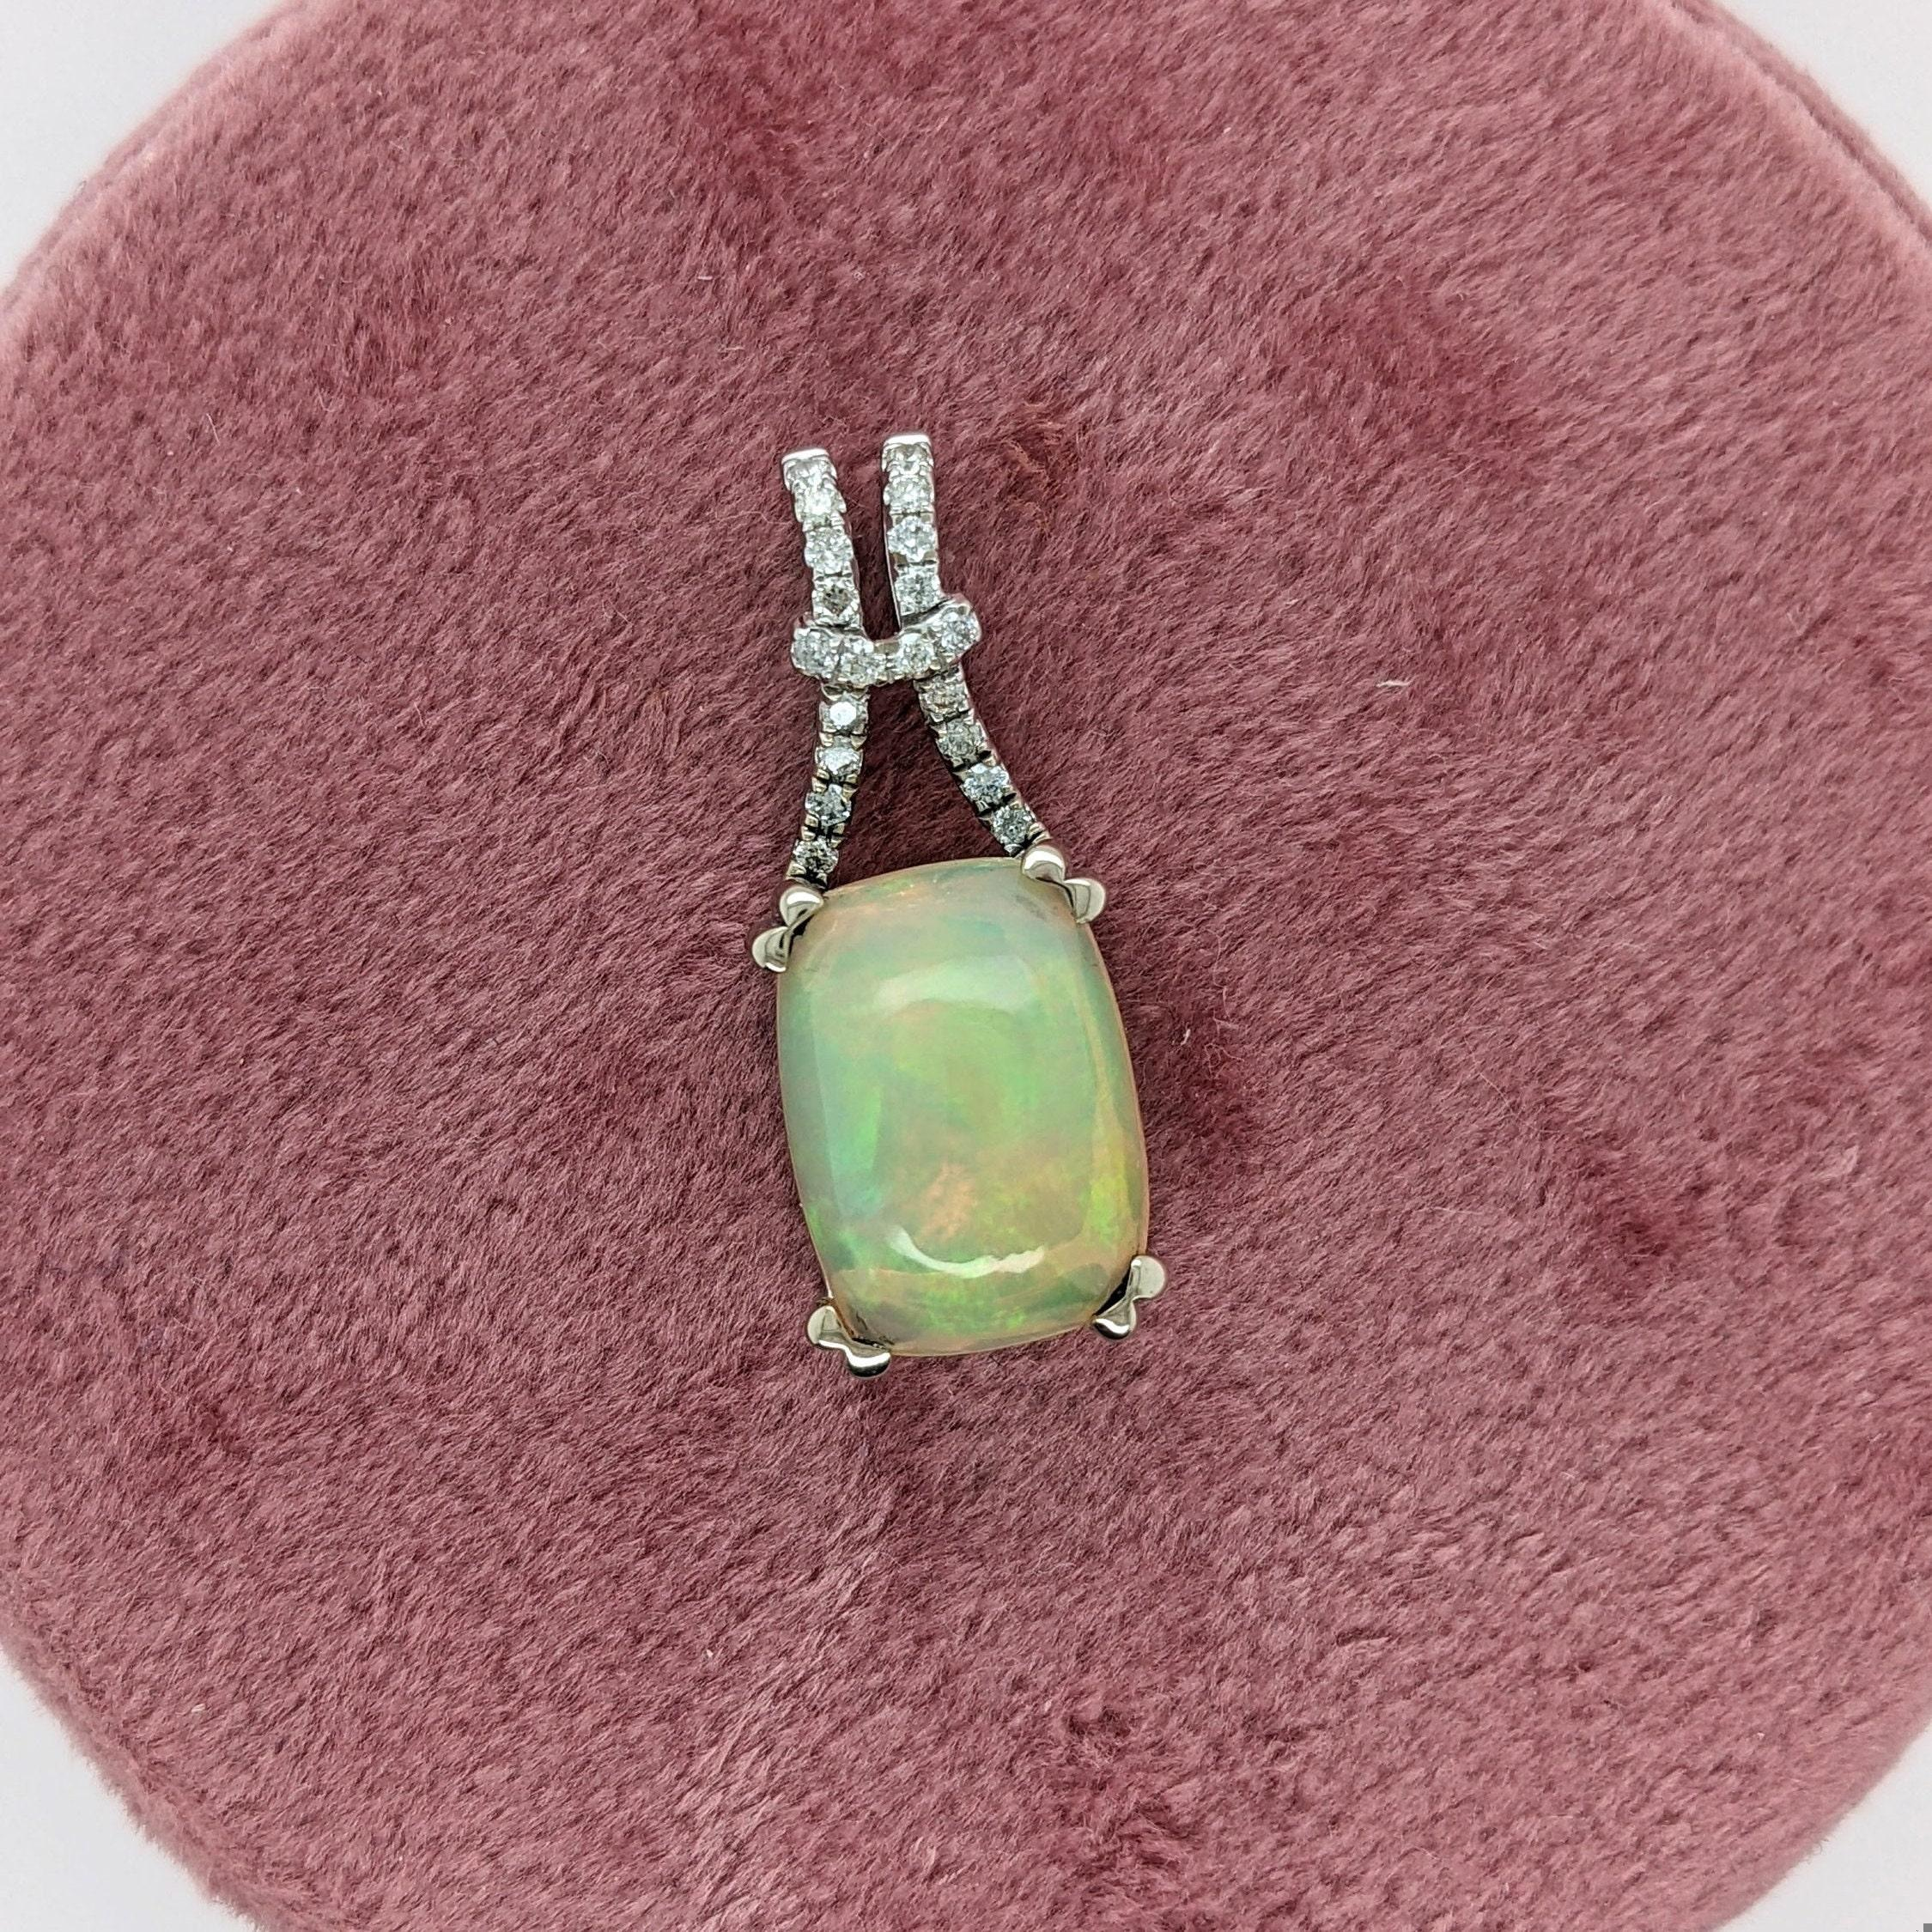 4.82ct Opal Pendant w Earth Mined Diamonds in Solid 14K White Gold Cushion 14x10